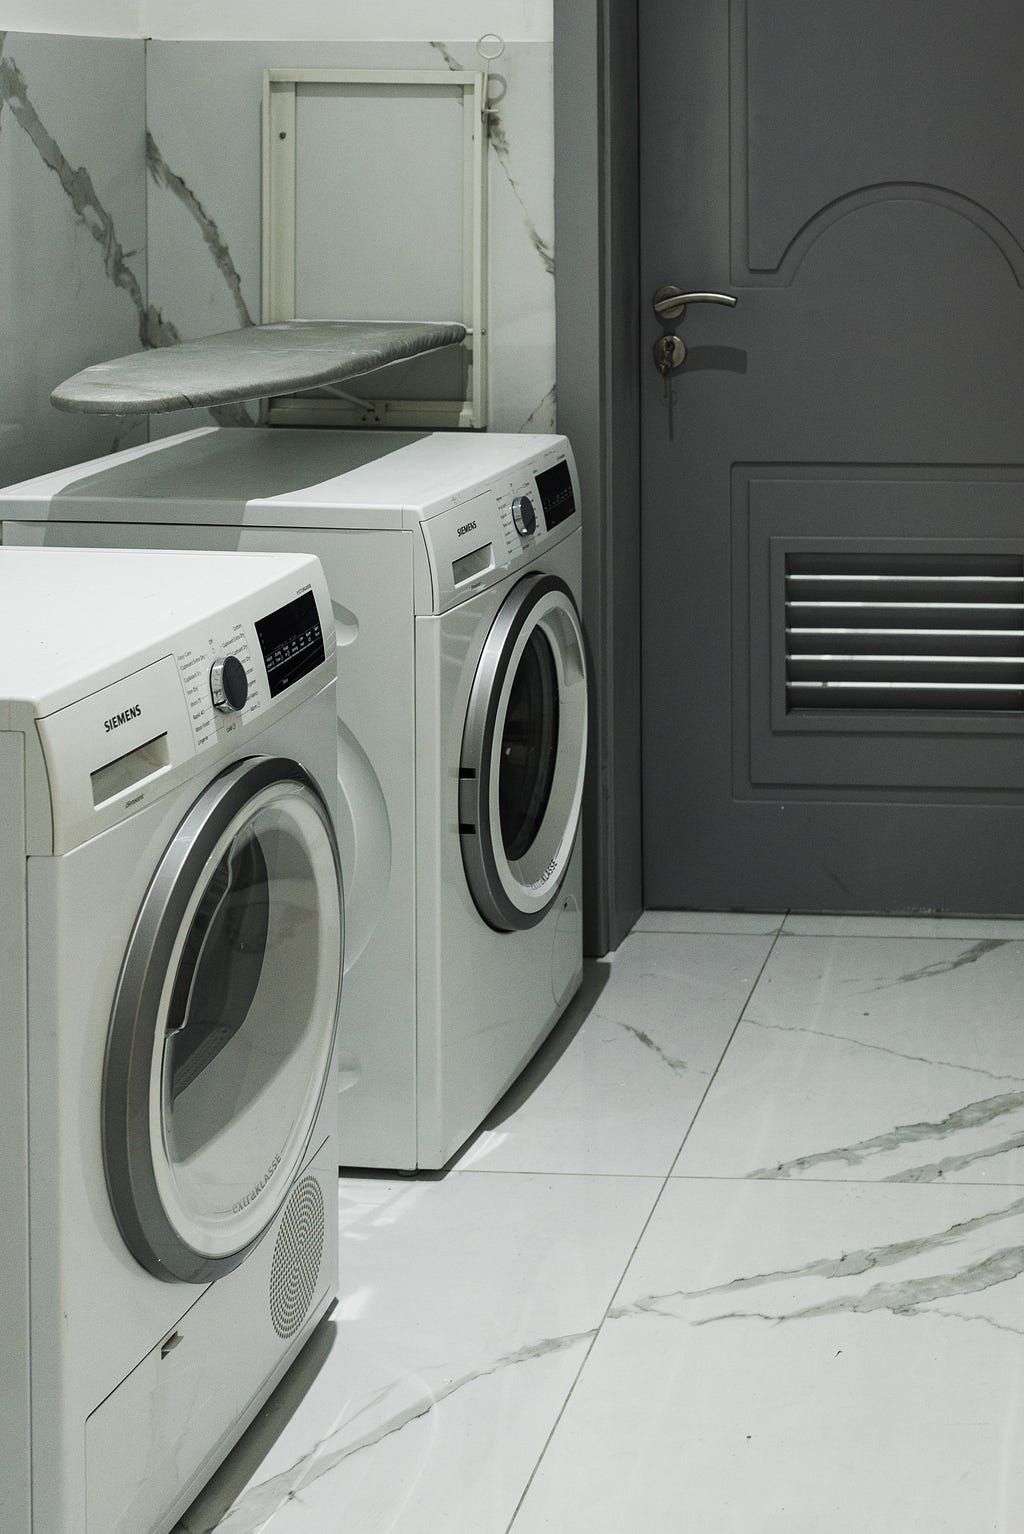 Picture of two clothes washers, side by side, in a laundry room.